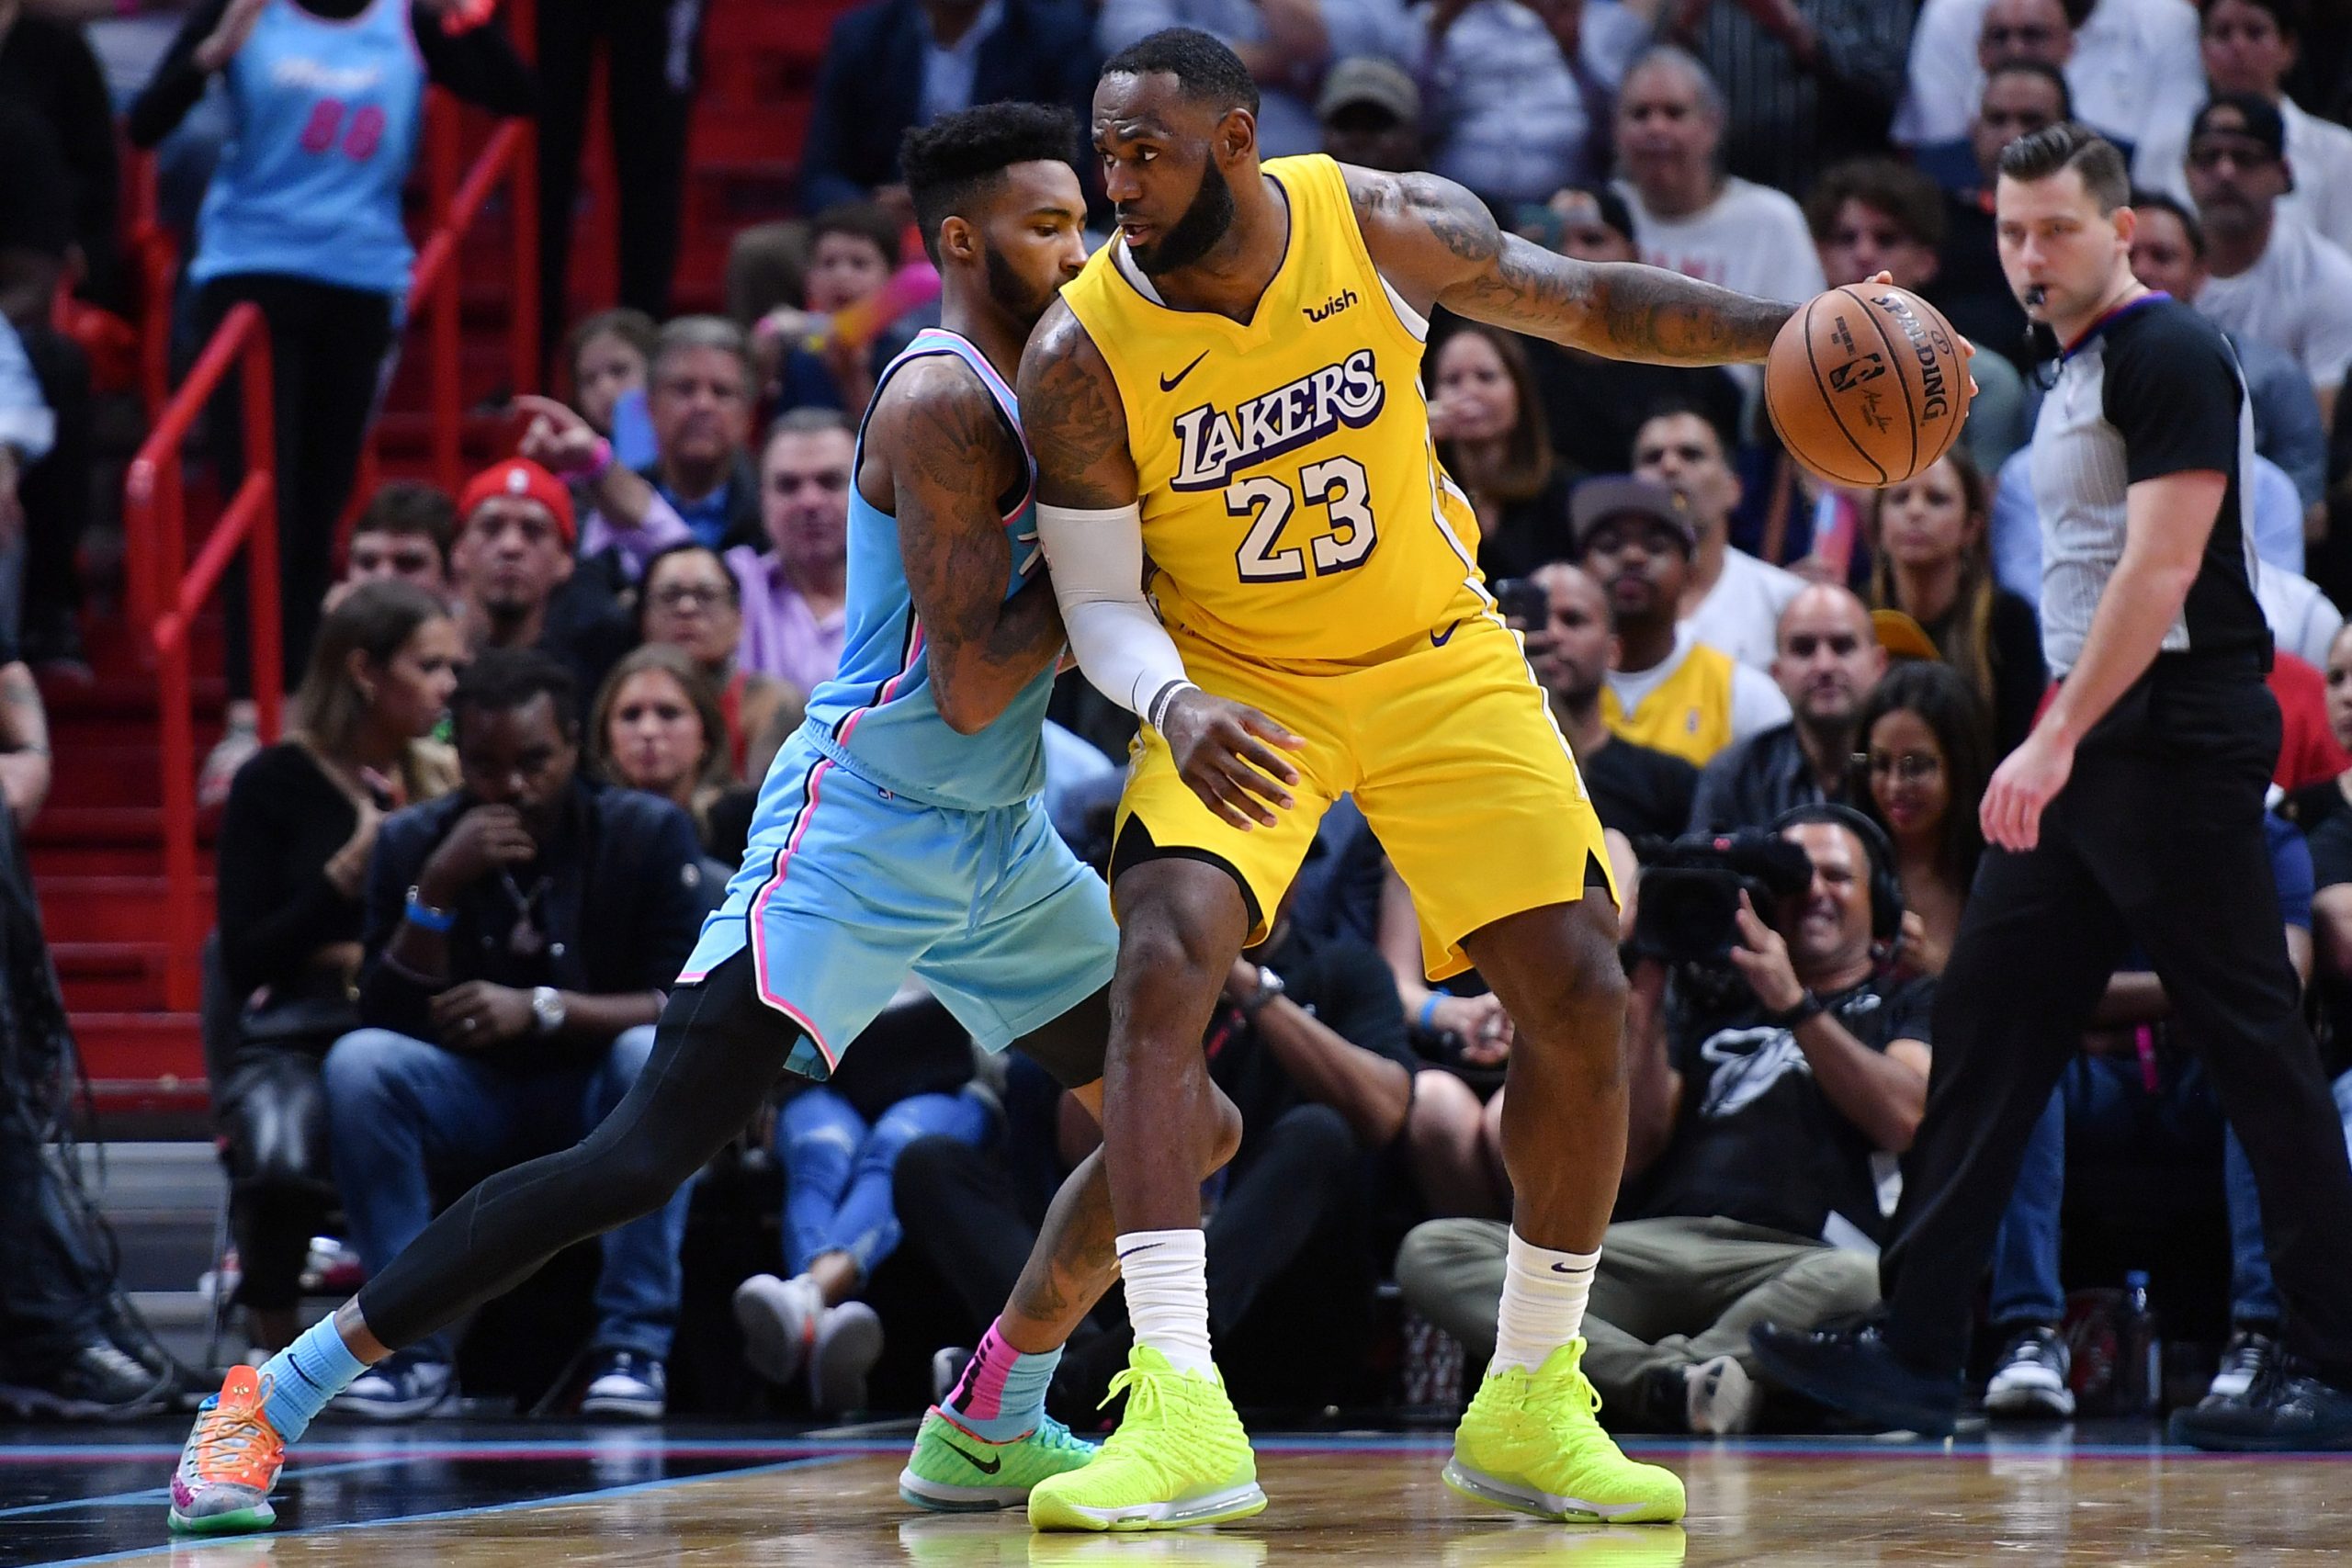 Los Angeles Lakers forward LeBron James (23) dribbles the ball against Miami Heat